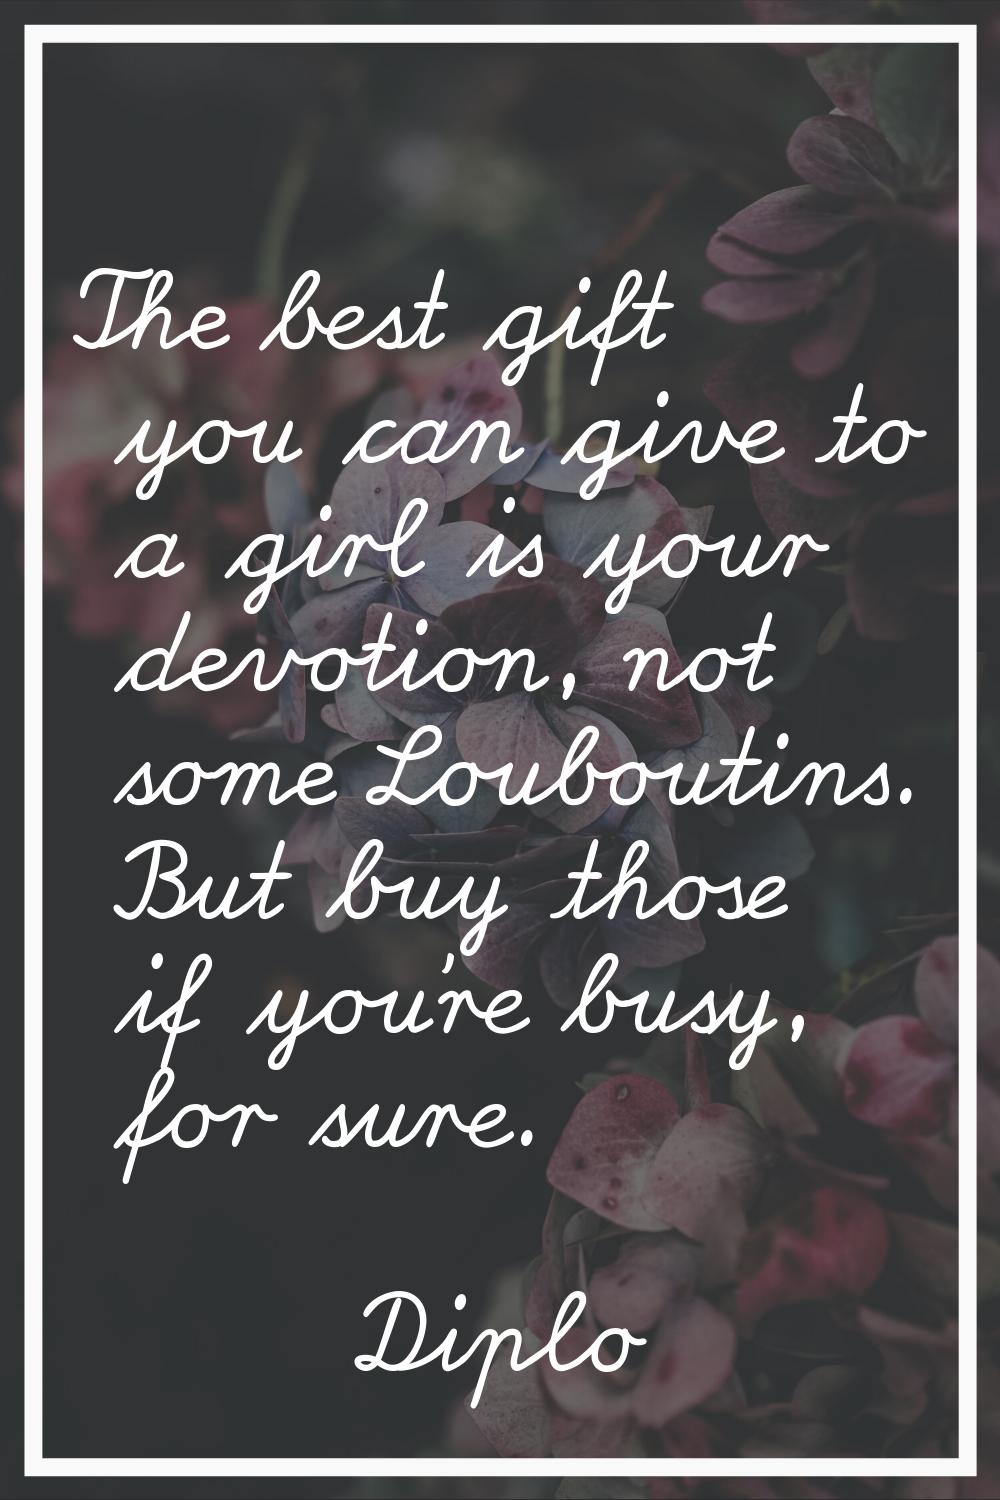 The best gift you can give to a girl is your devotion, not some Louboutins. But buy those if you're